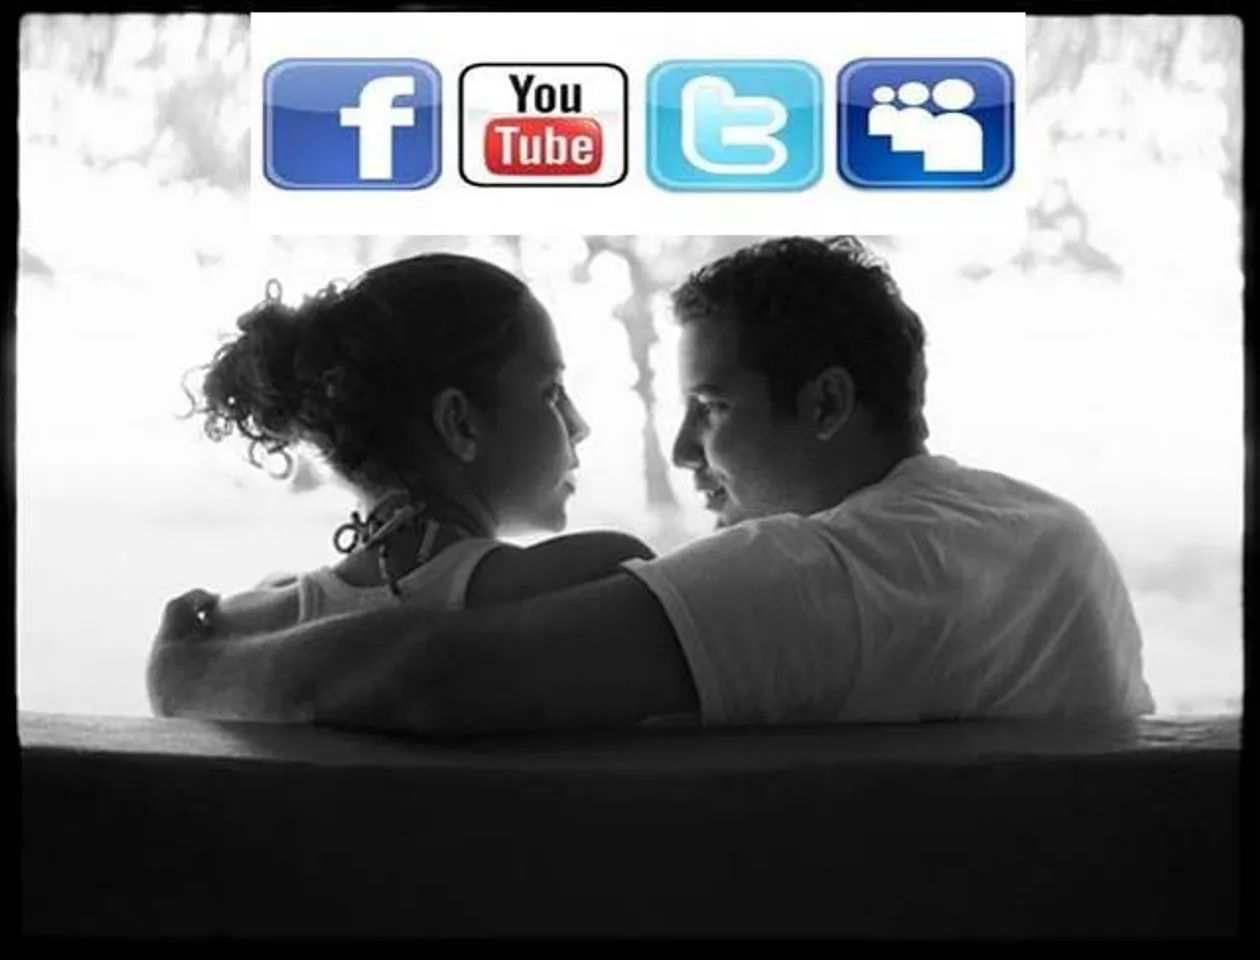 10 Tips for Getting Connected to Prospective Dates on Social Media Networks